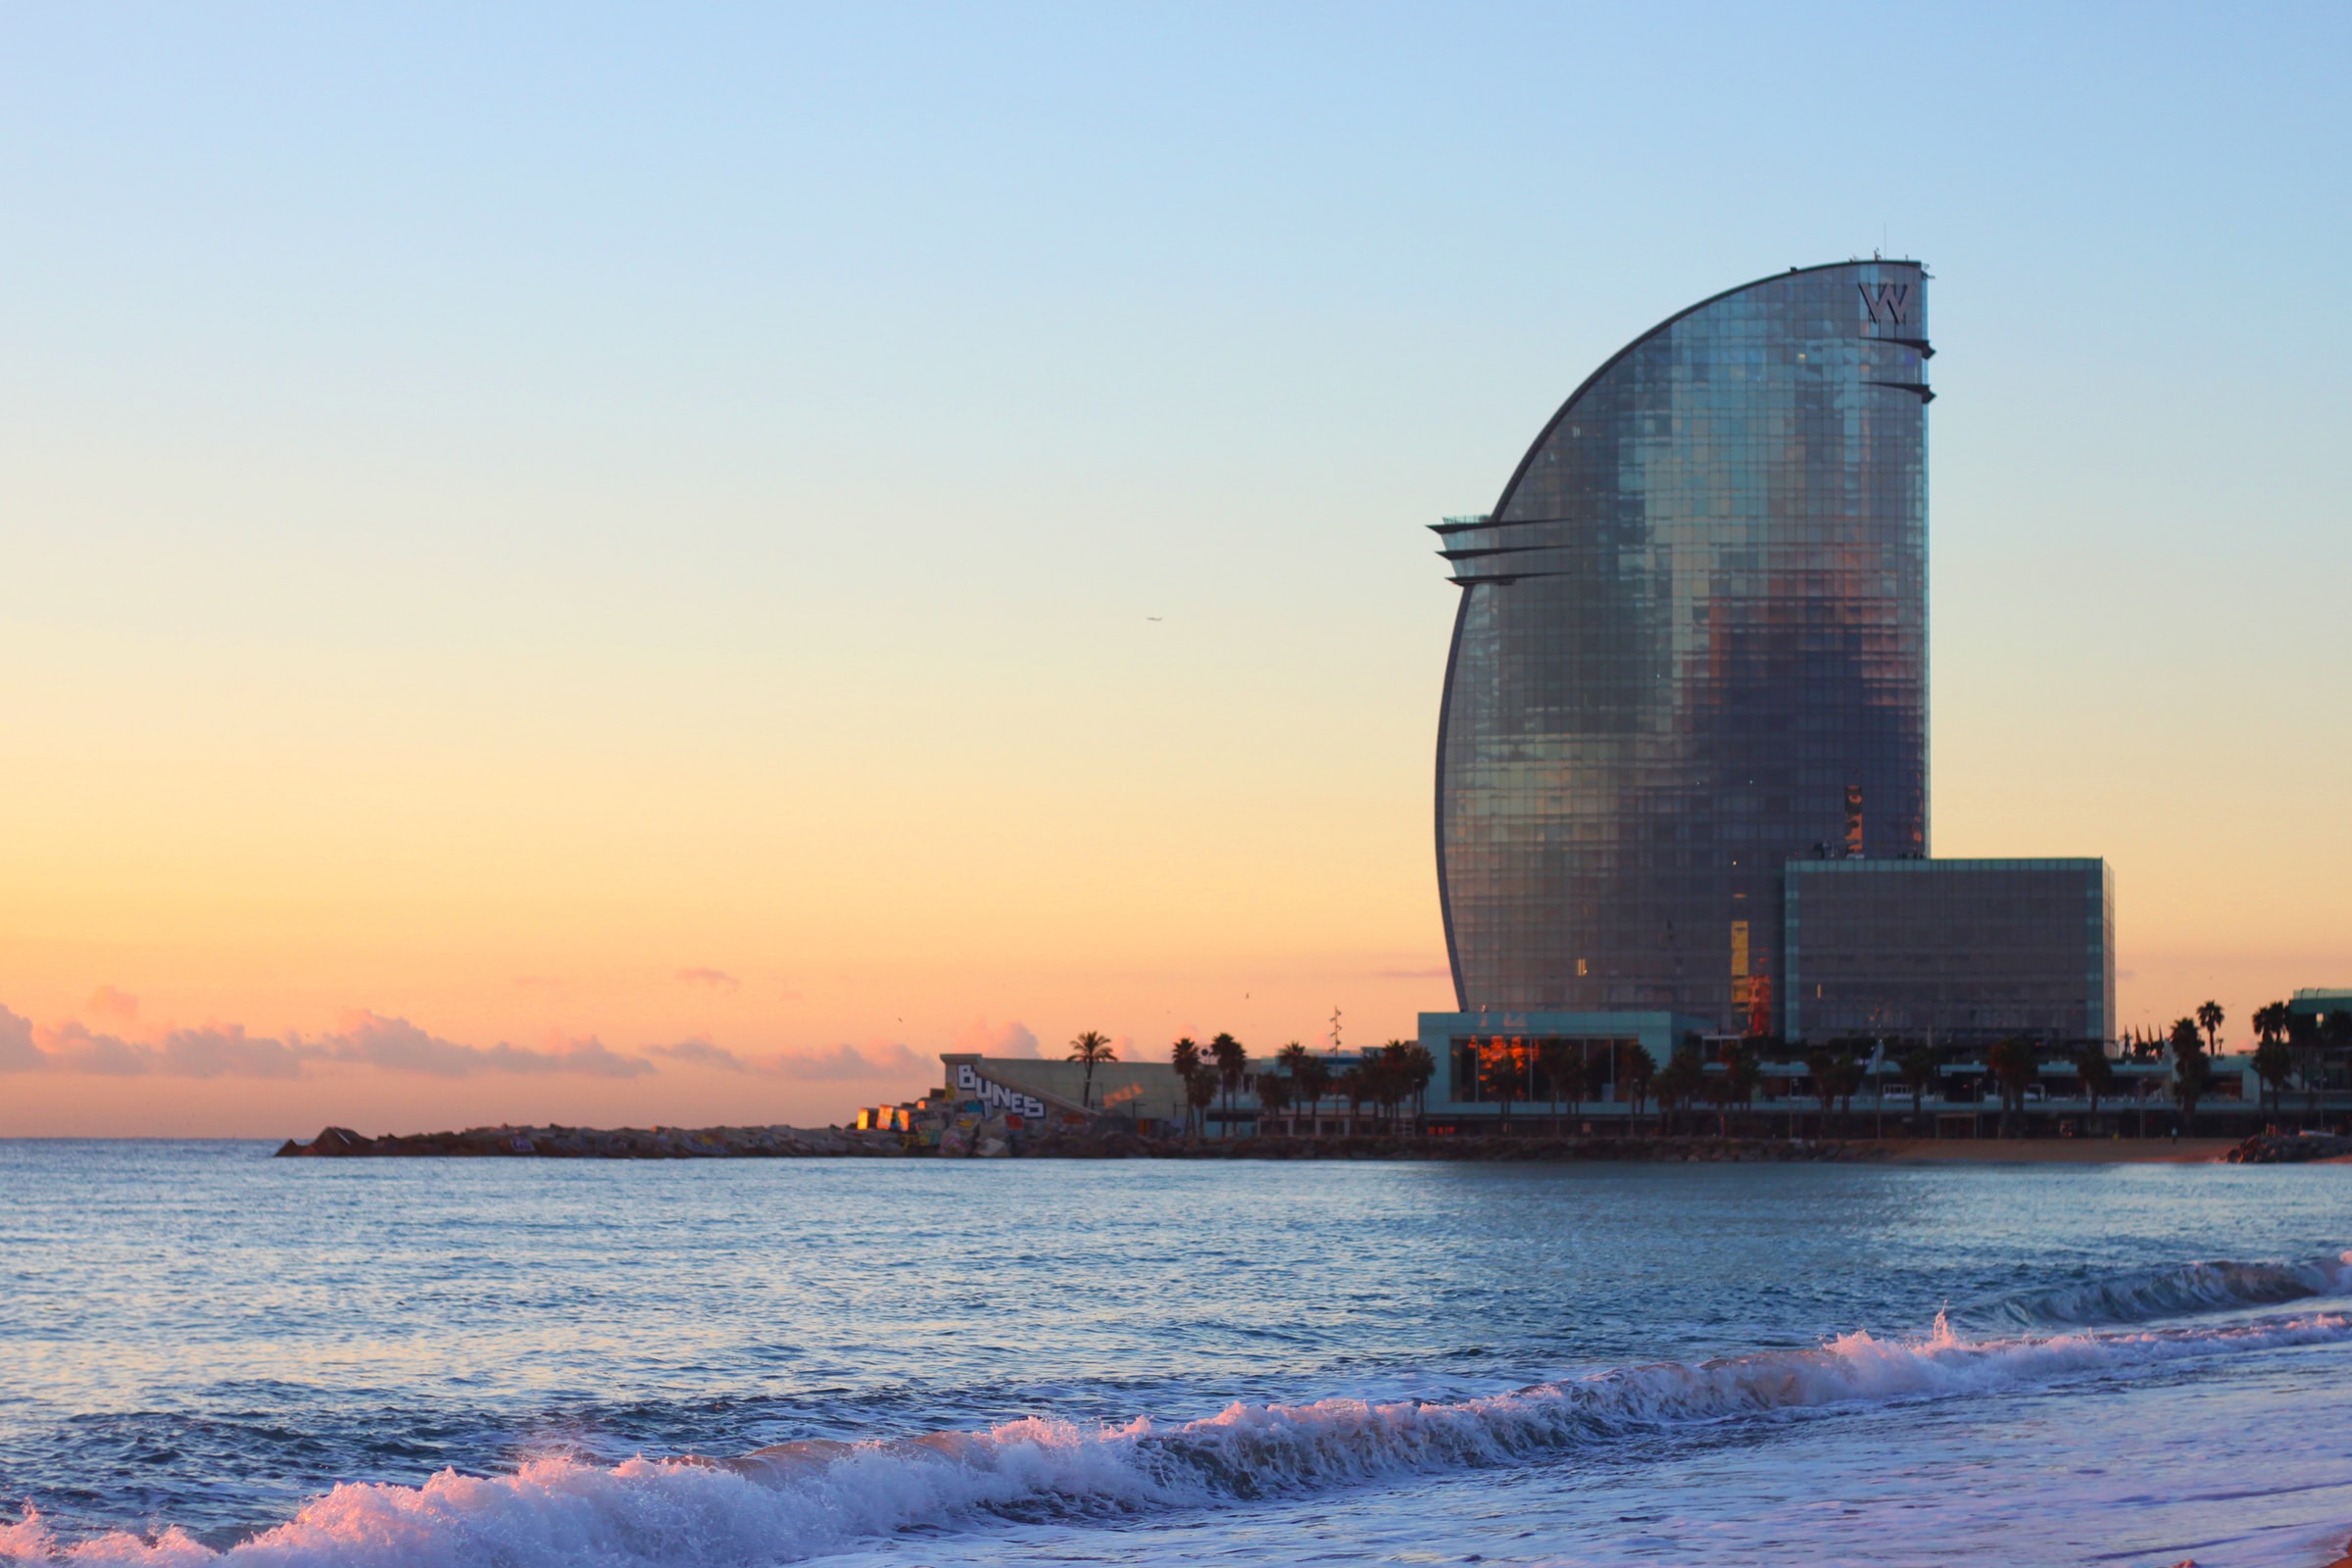 Sant Sebastià beach with the emblematic Barcelona's building in the background